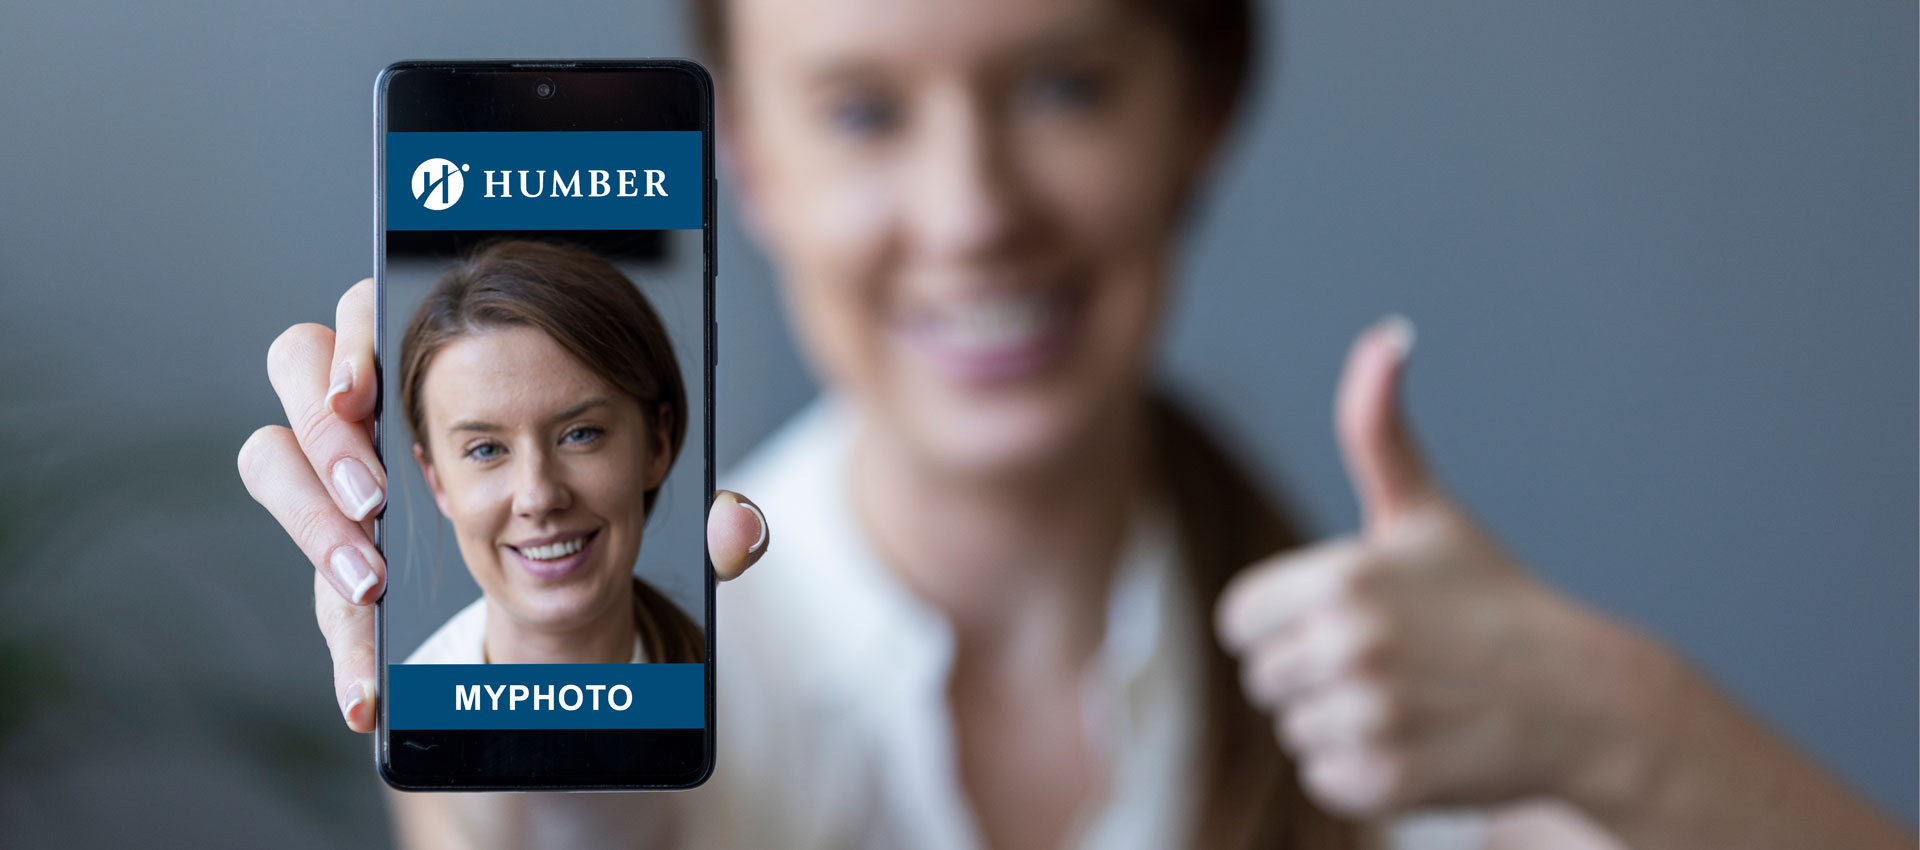 Person holding up phone displaying their photo